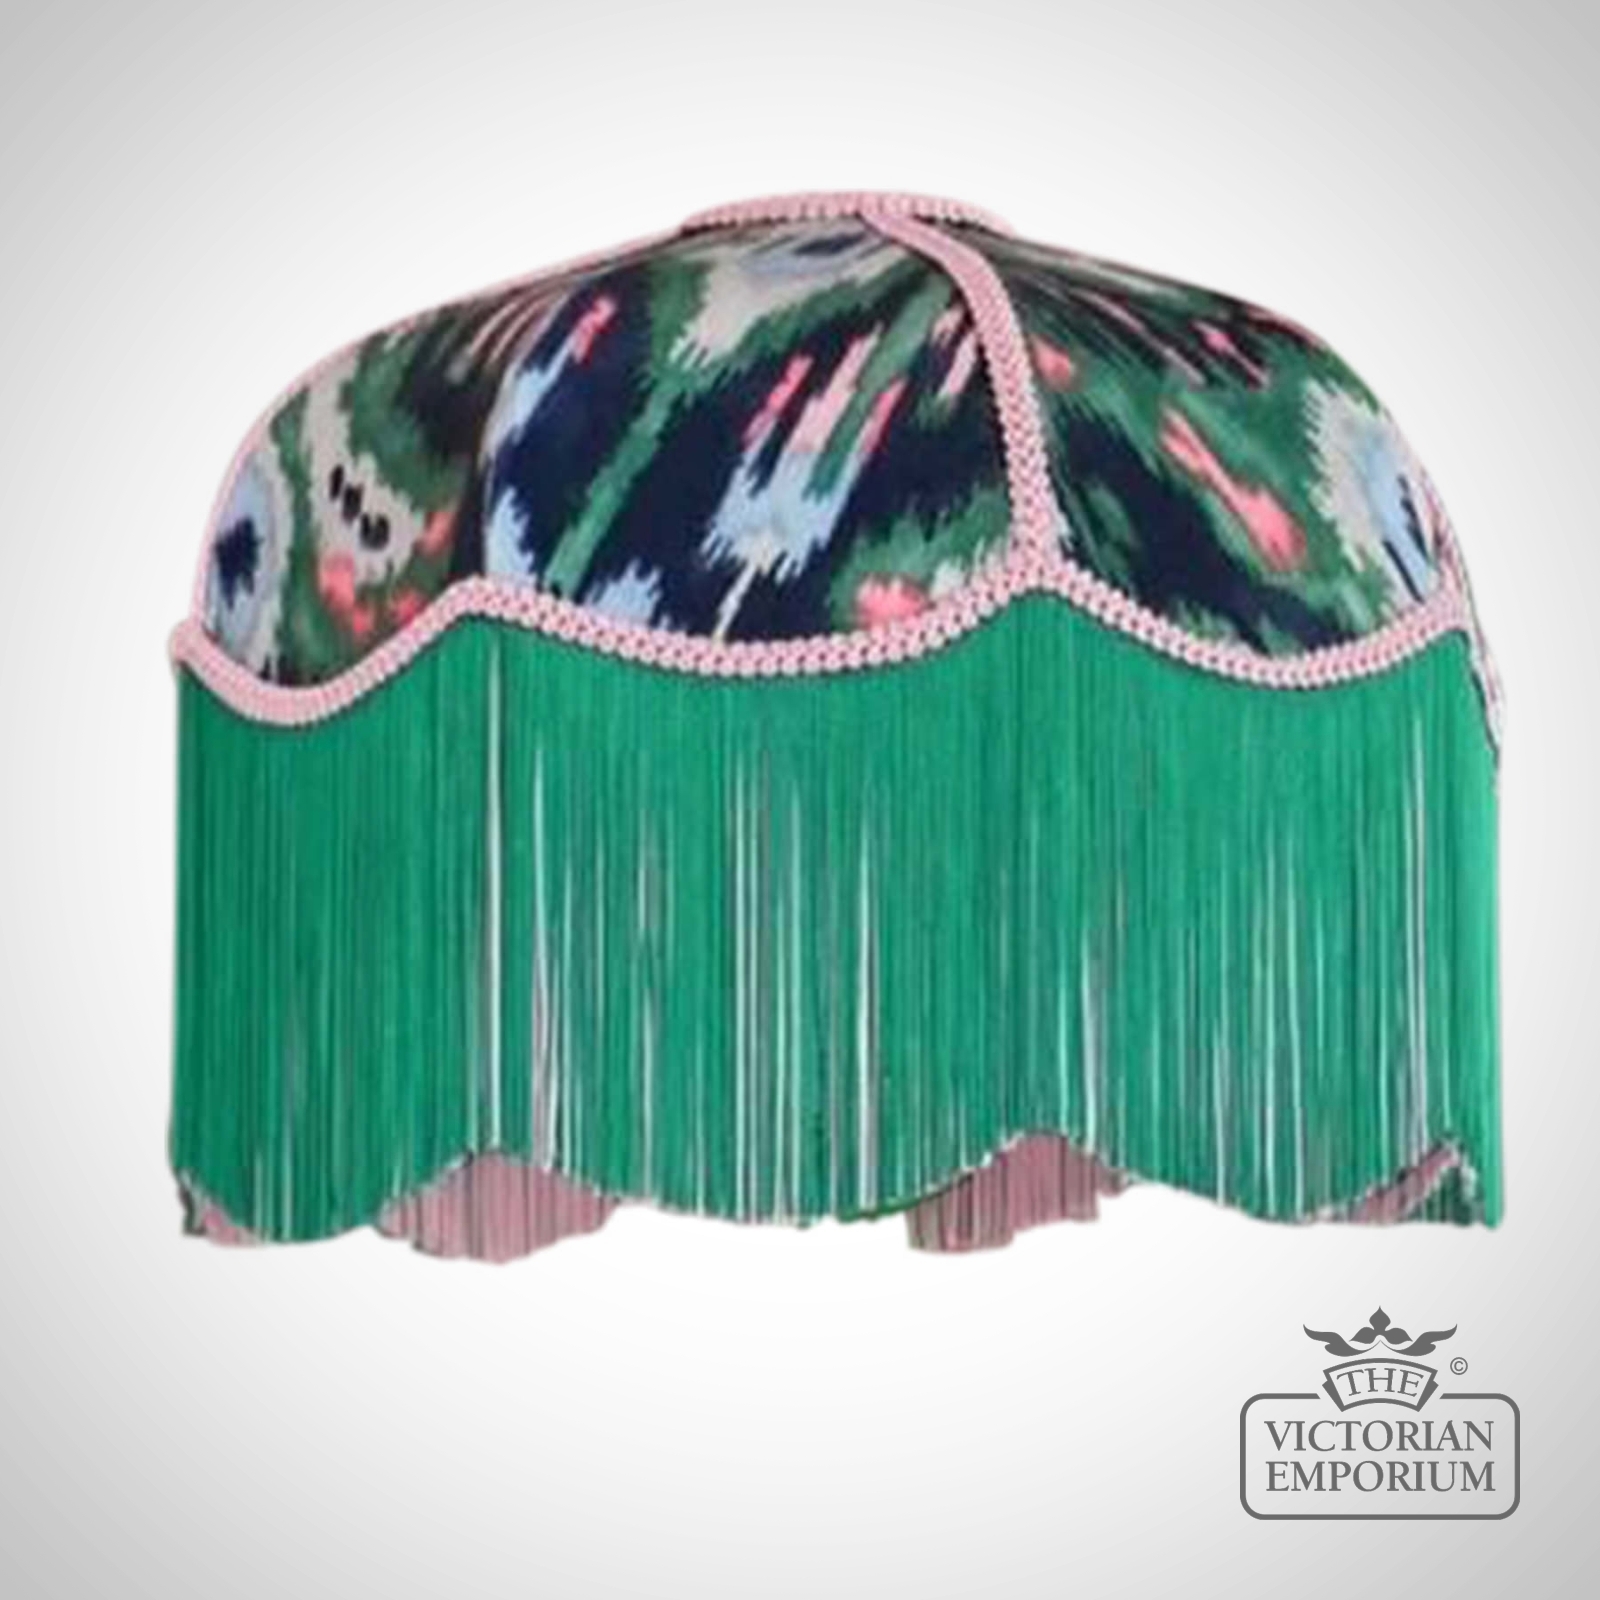 Tara Deluxe Art Deco Decorative Fringed Lamp Shade in a Choice of Sizes